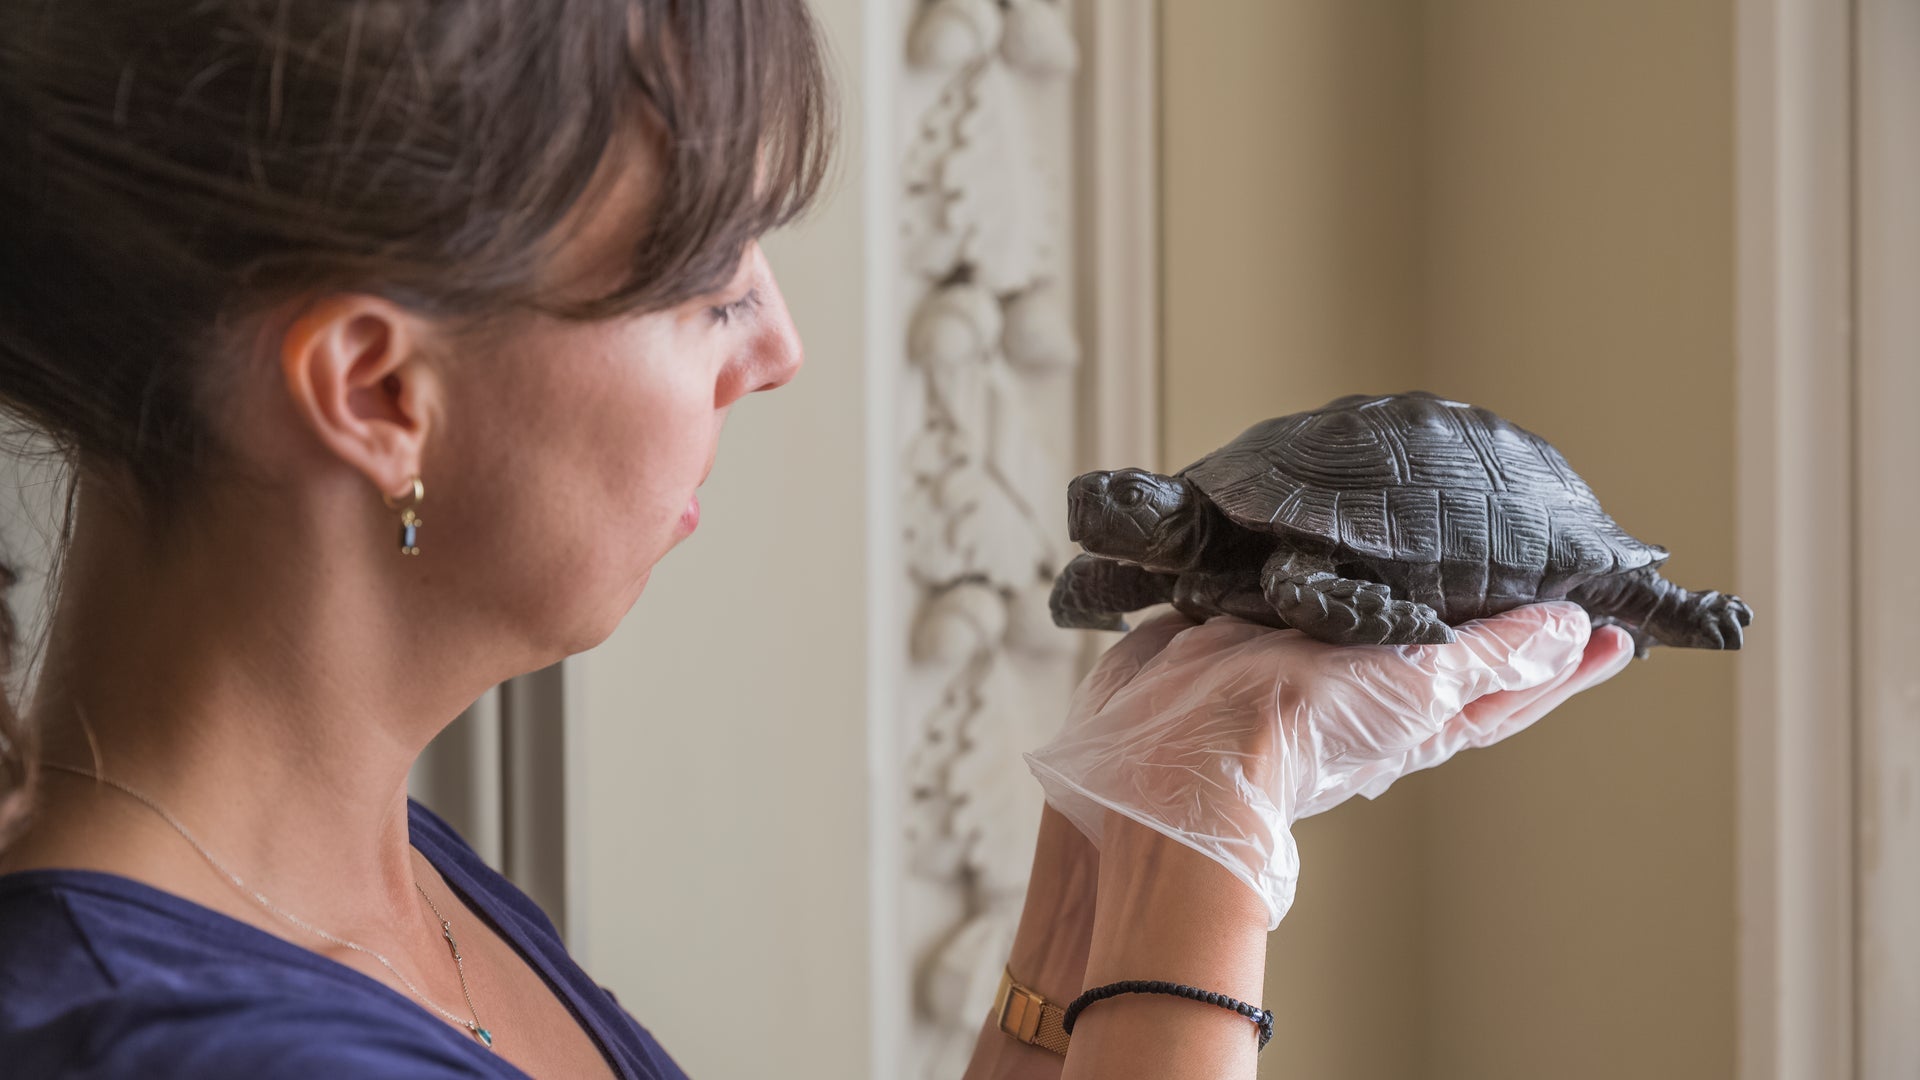 Property curator Elena Greer with one of the tortoises